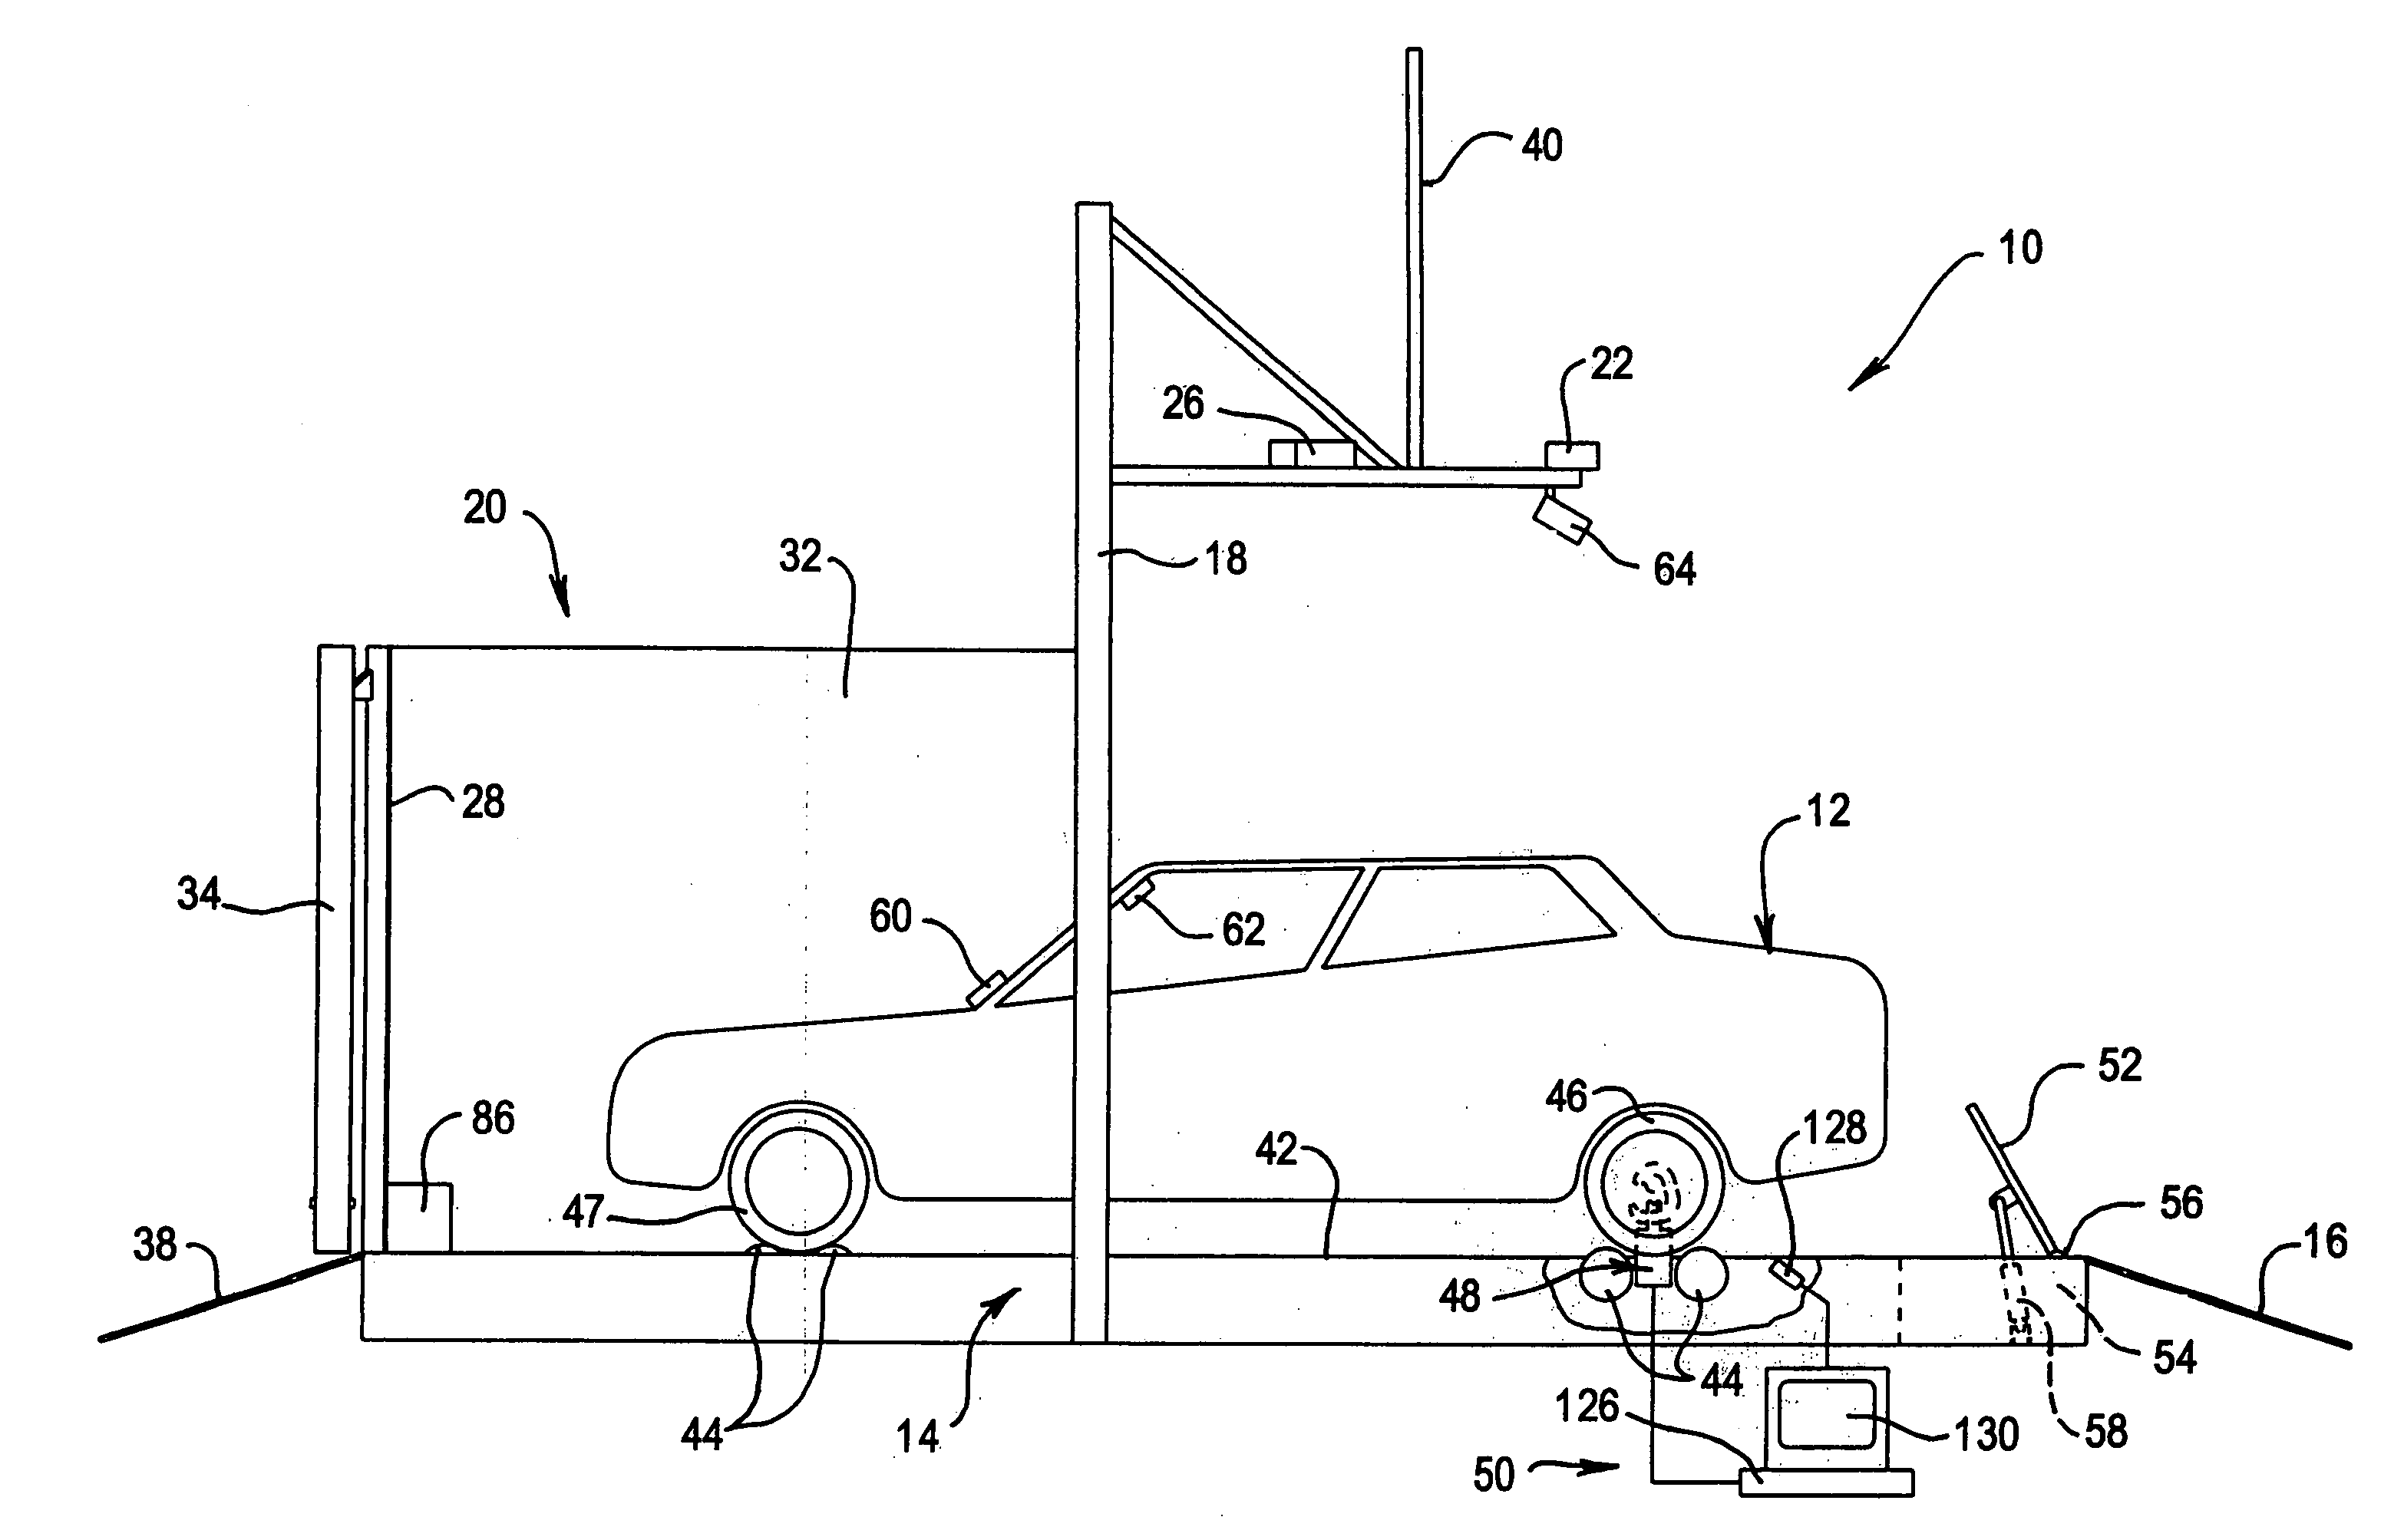 Vehicle securing mechanism for a dynamometer